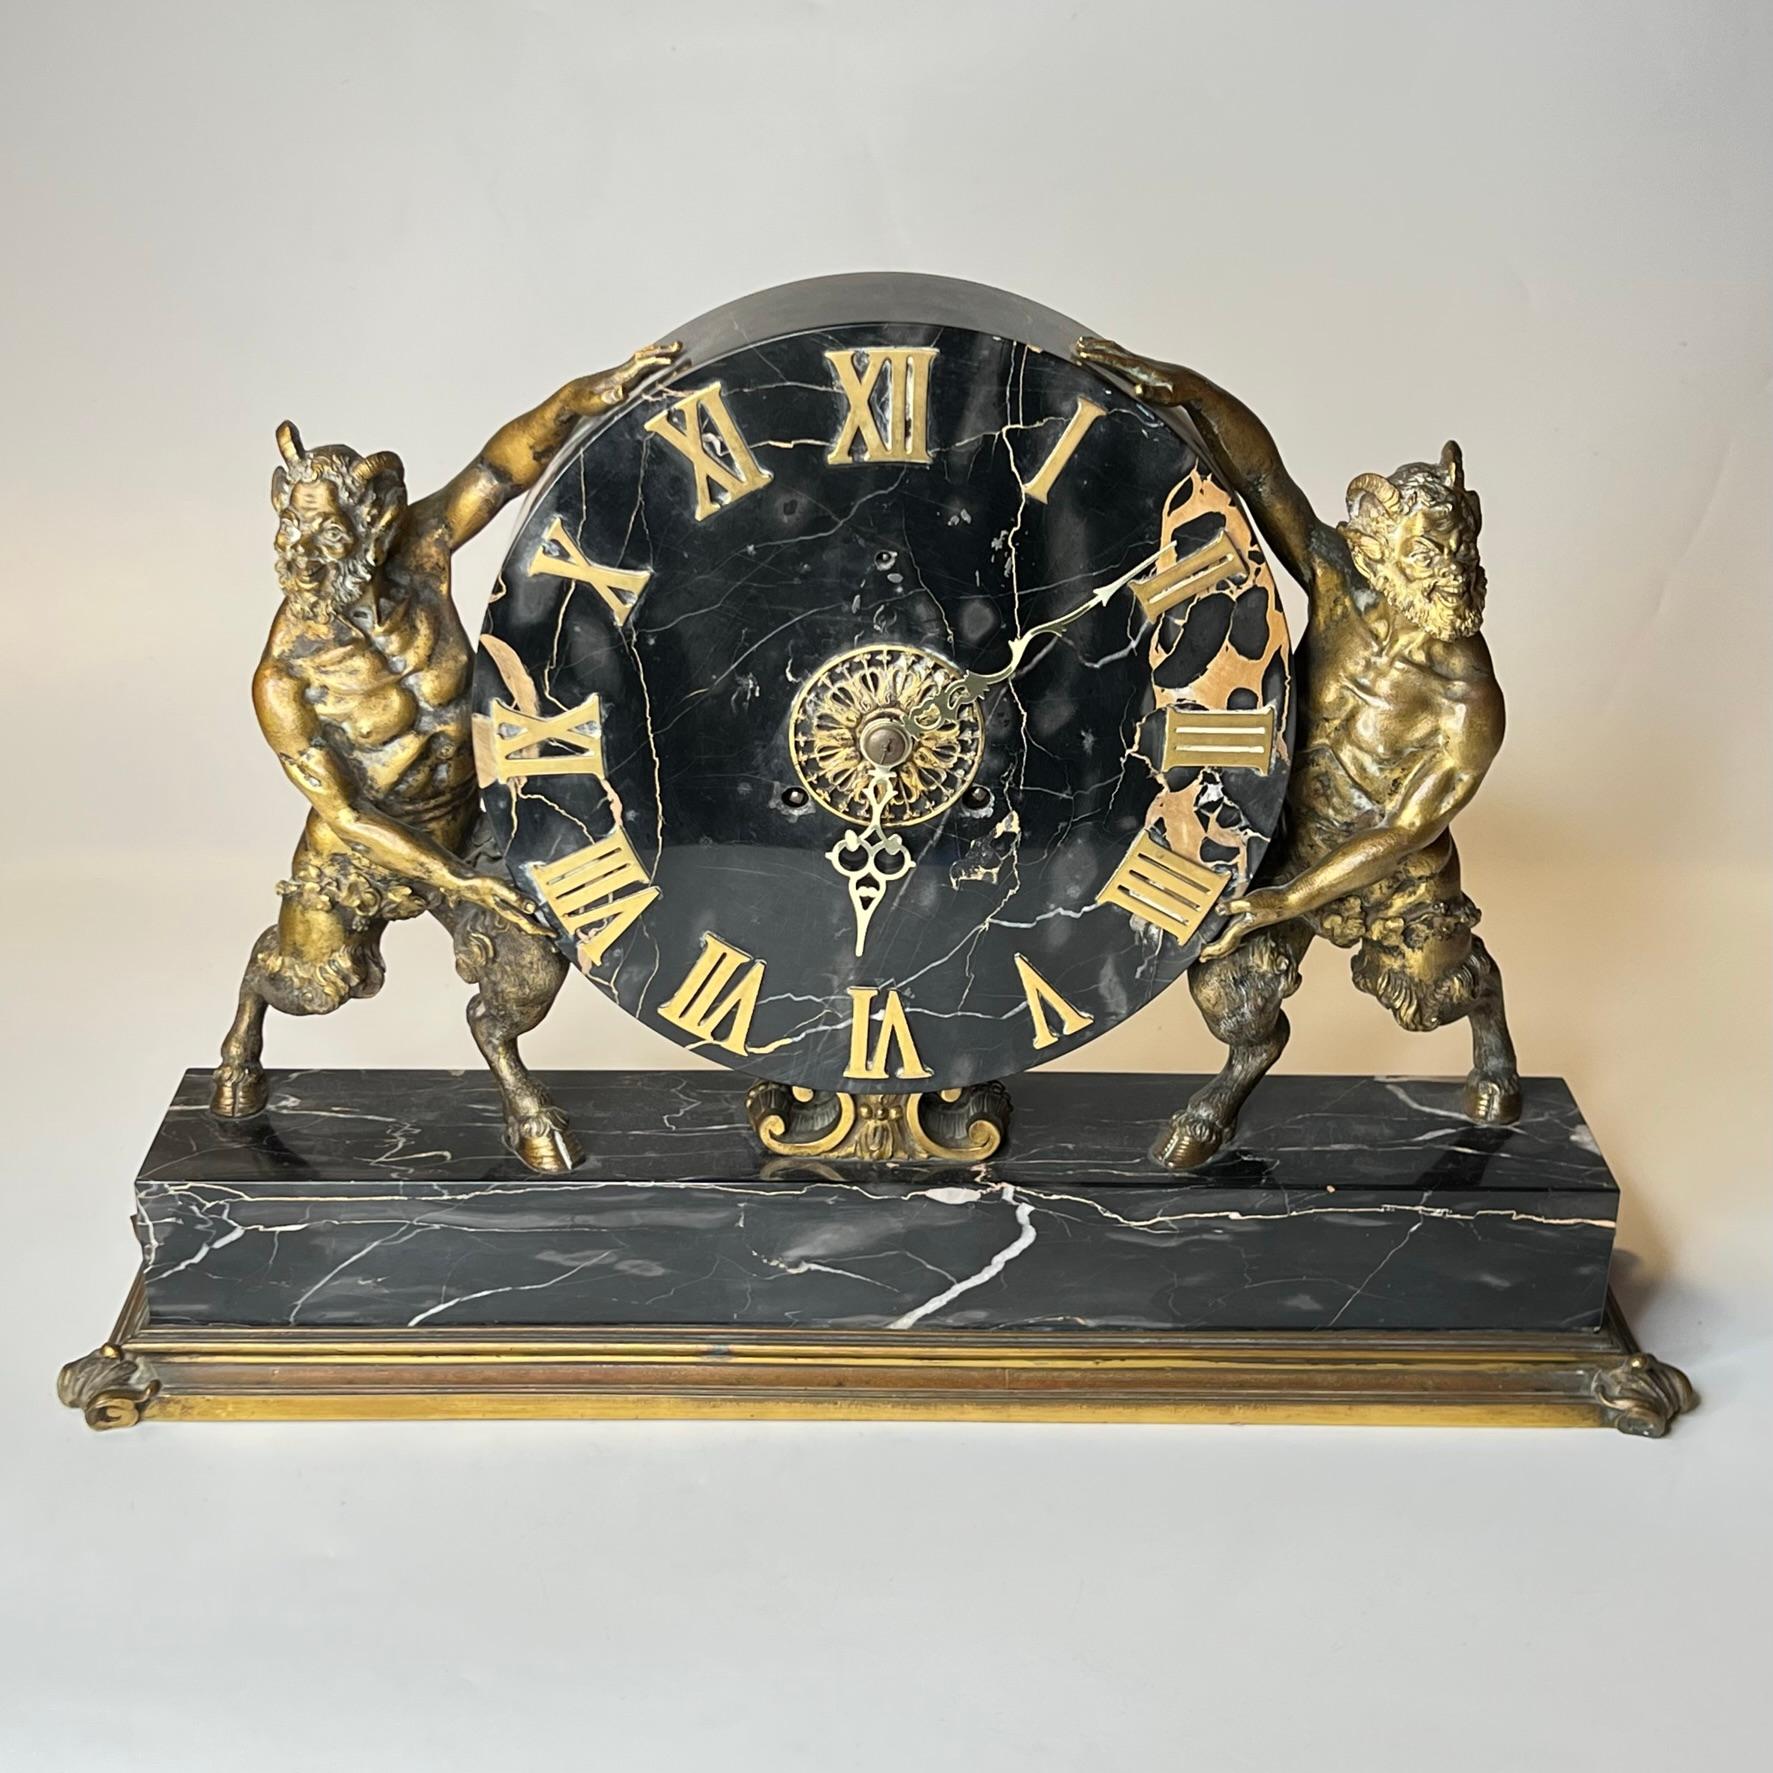 Neoclassical Revival E.F. Caldwell Neoclassical Marble and Bronze Mantel Clock